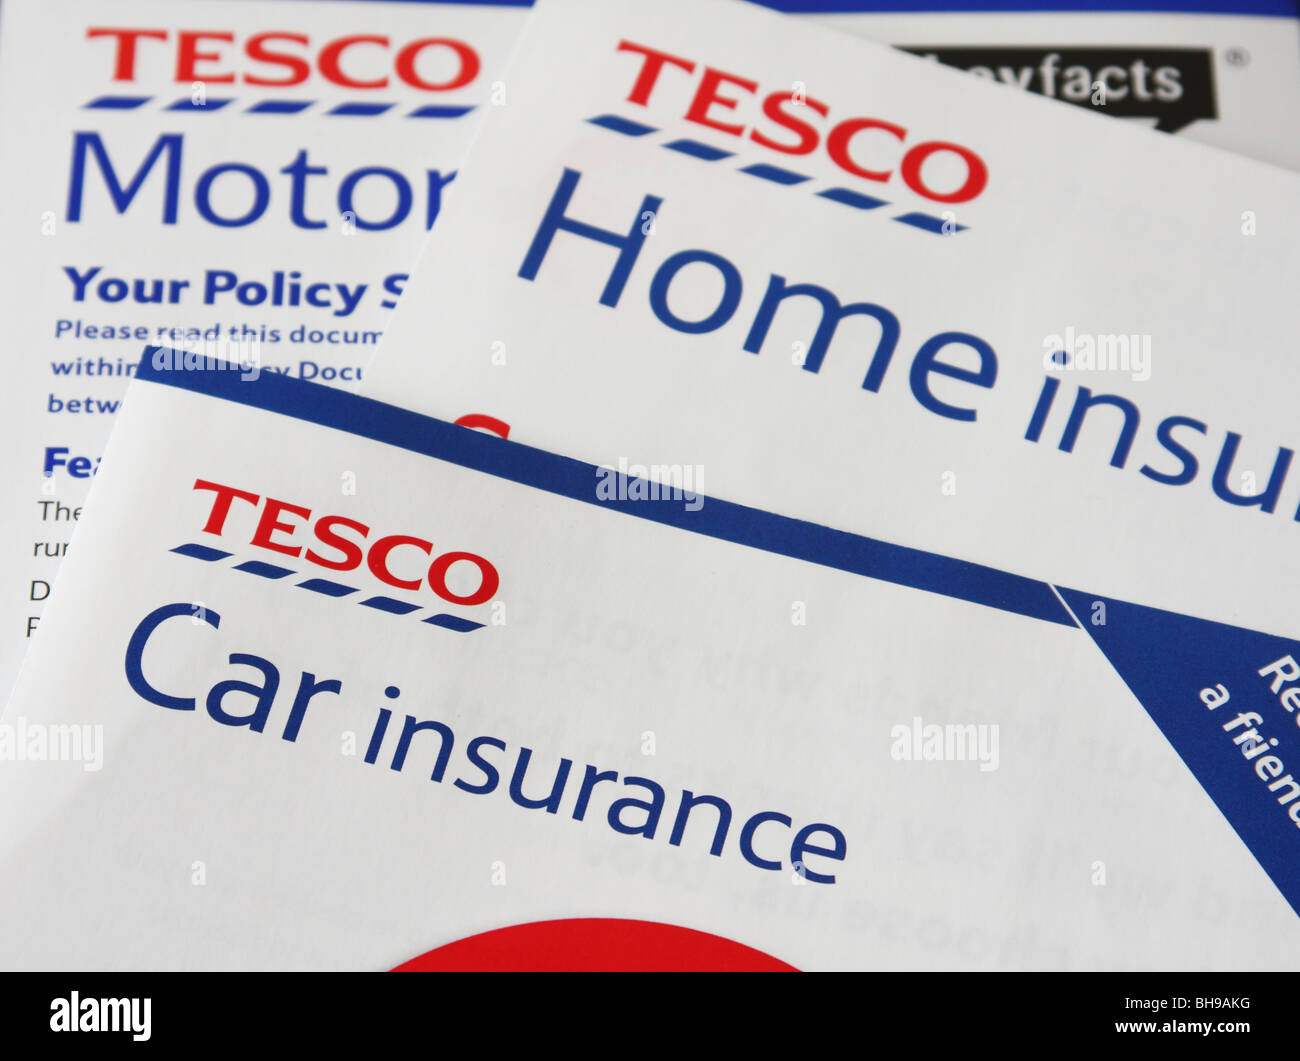 Tesco Products Stock Photos & Tesco Products Stock Images - Alamy